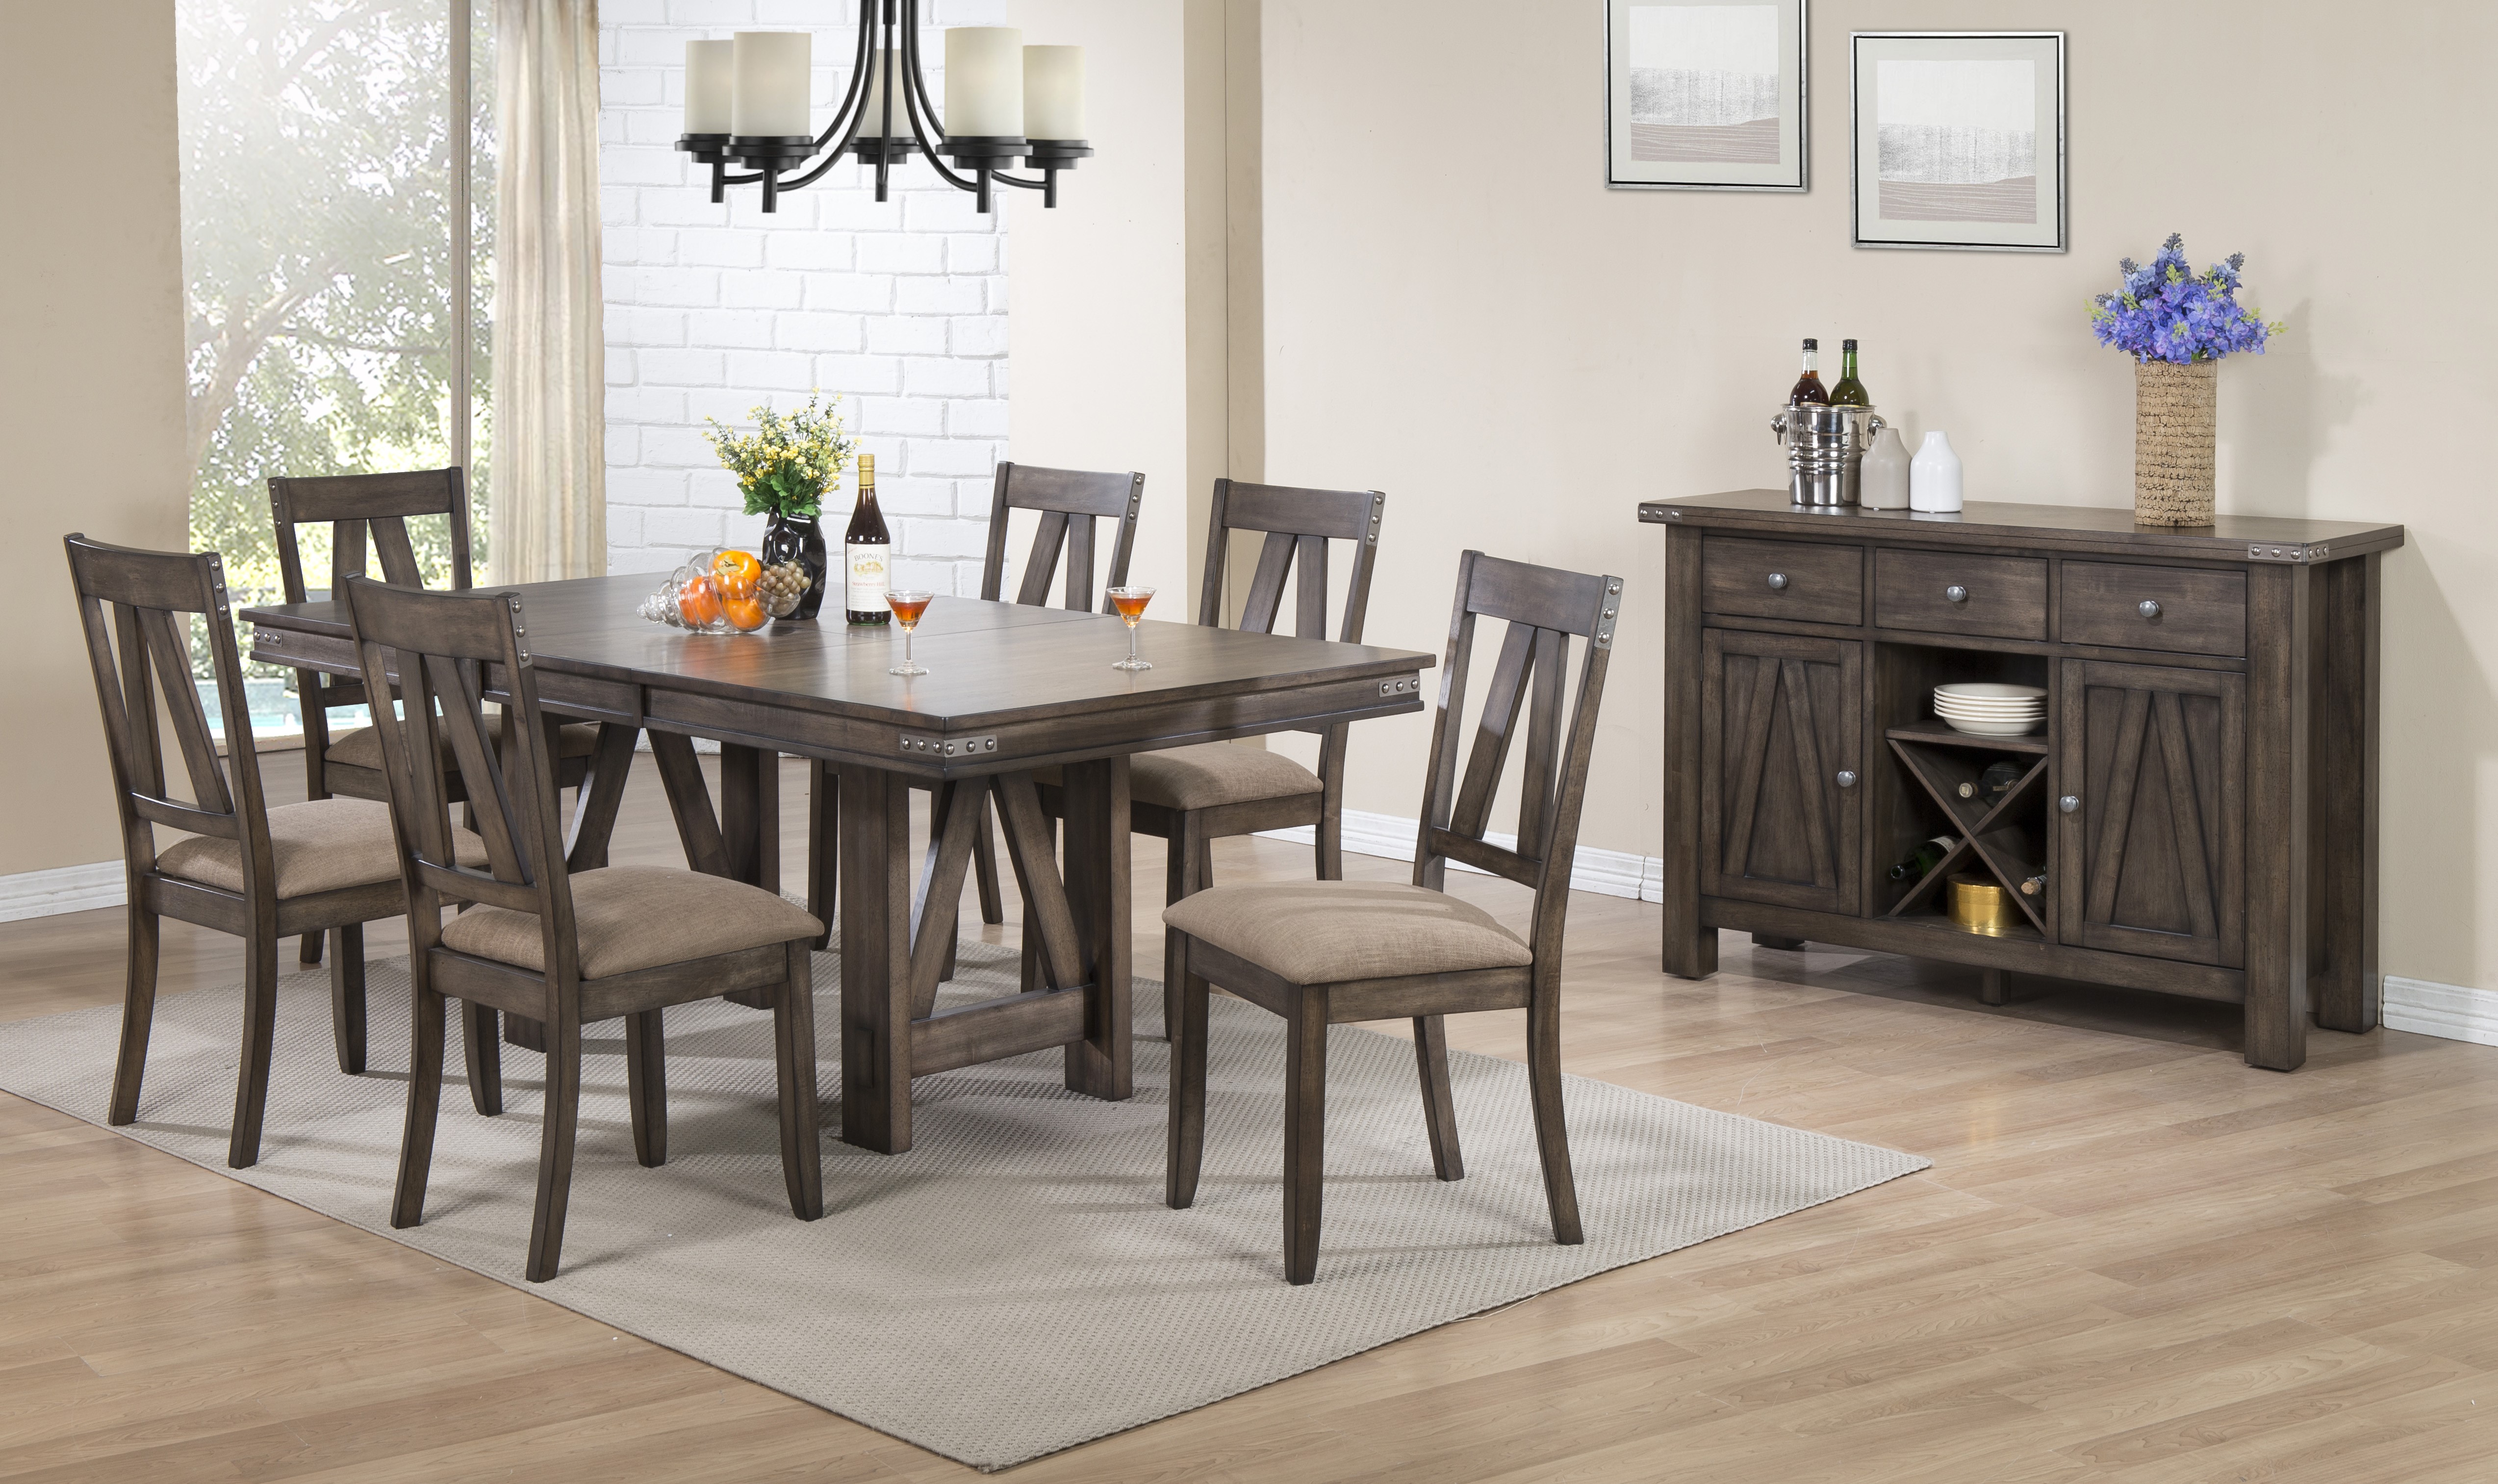 Lynn Dining Set W Buffet 2kfurniture, Dining Room Tables With Buffet